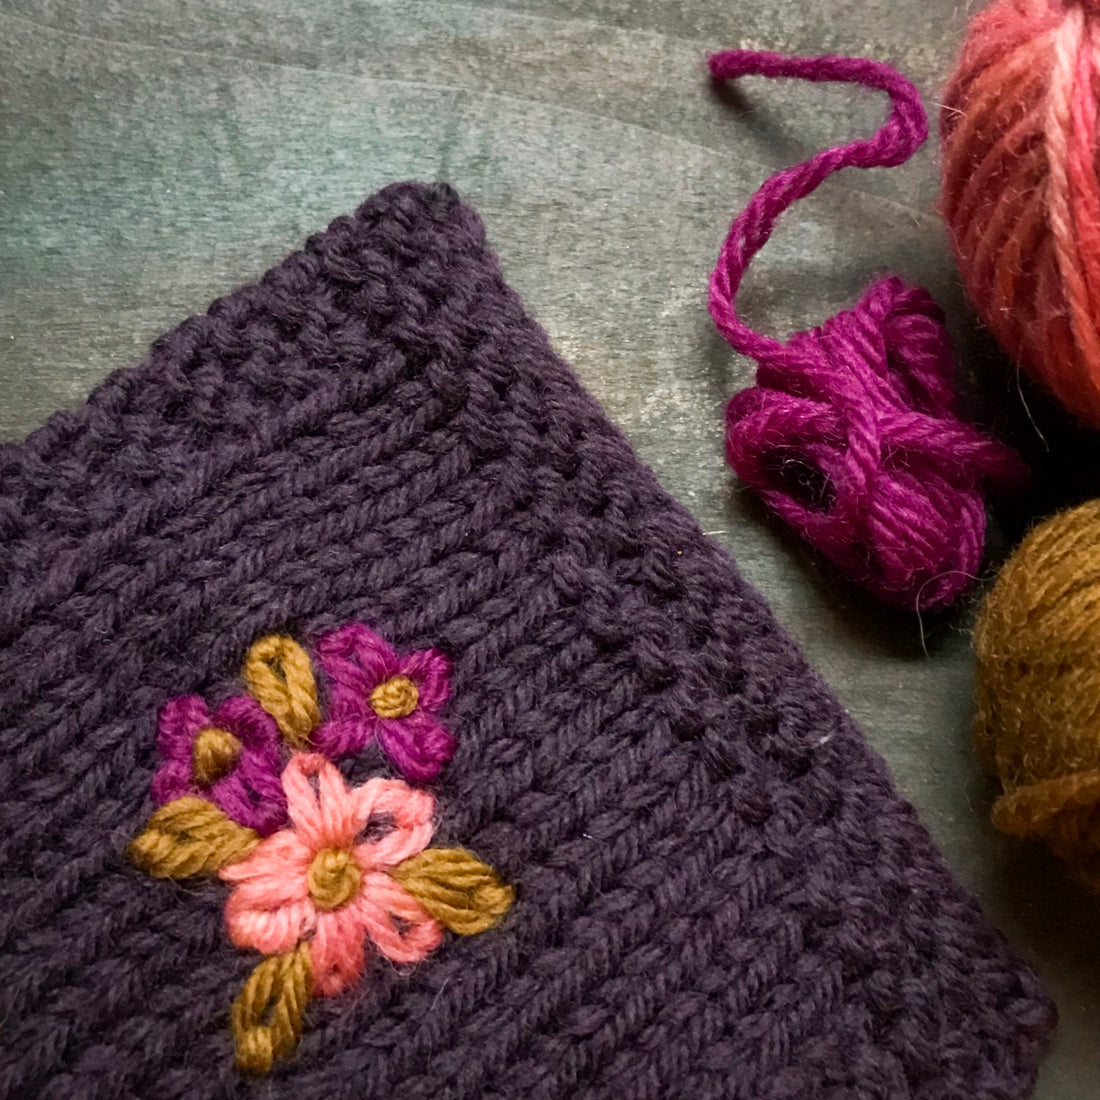 Knitting How-To:  Embroidering a Flower on Your Knitted Fabric